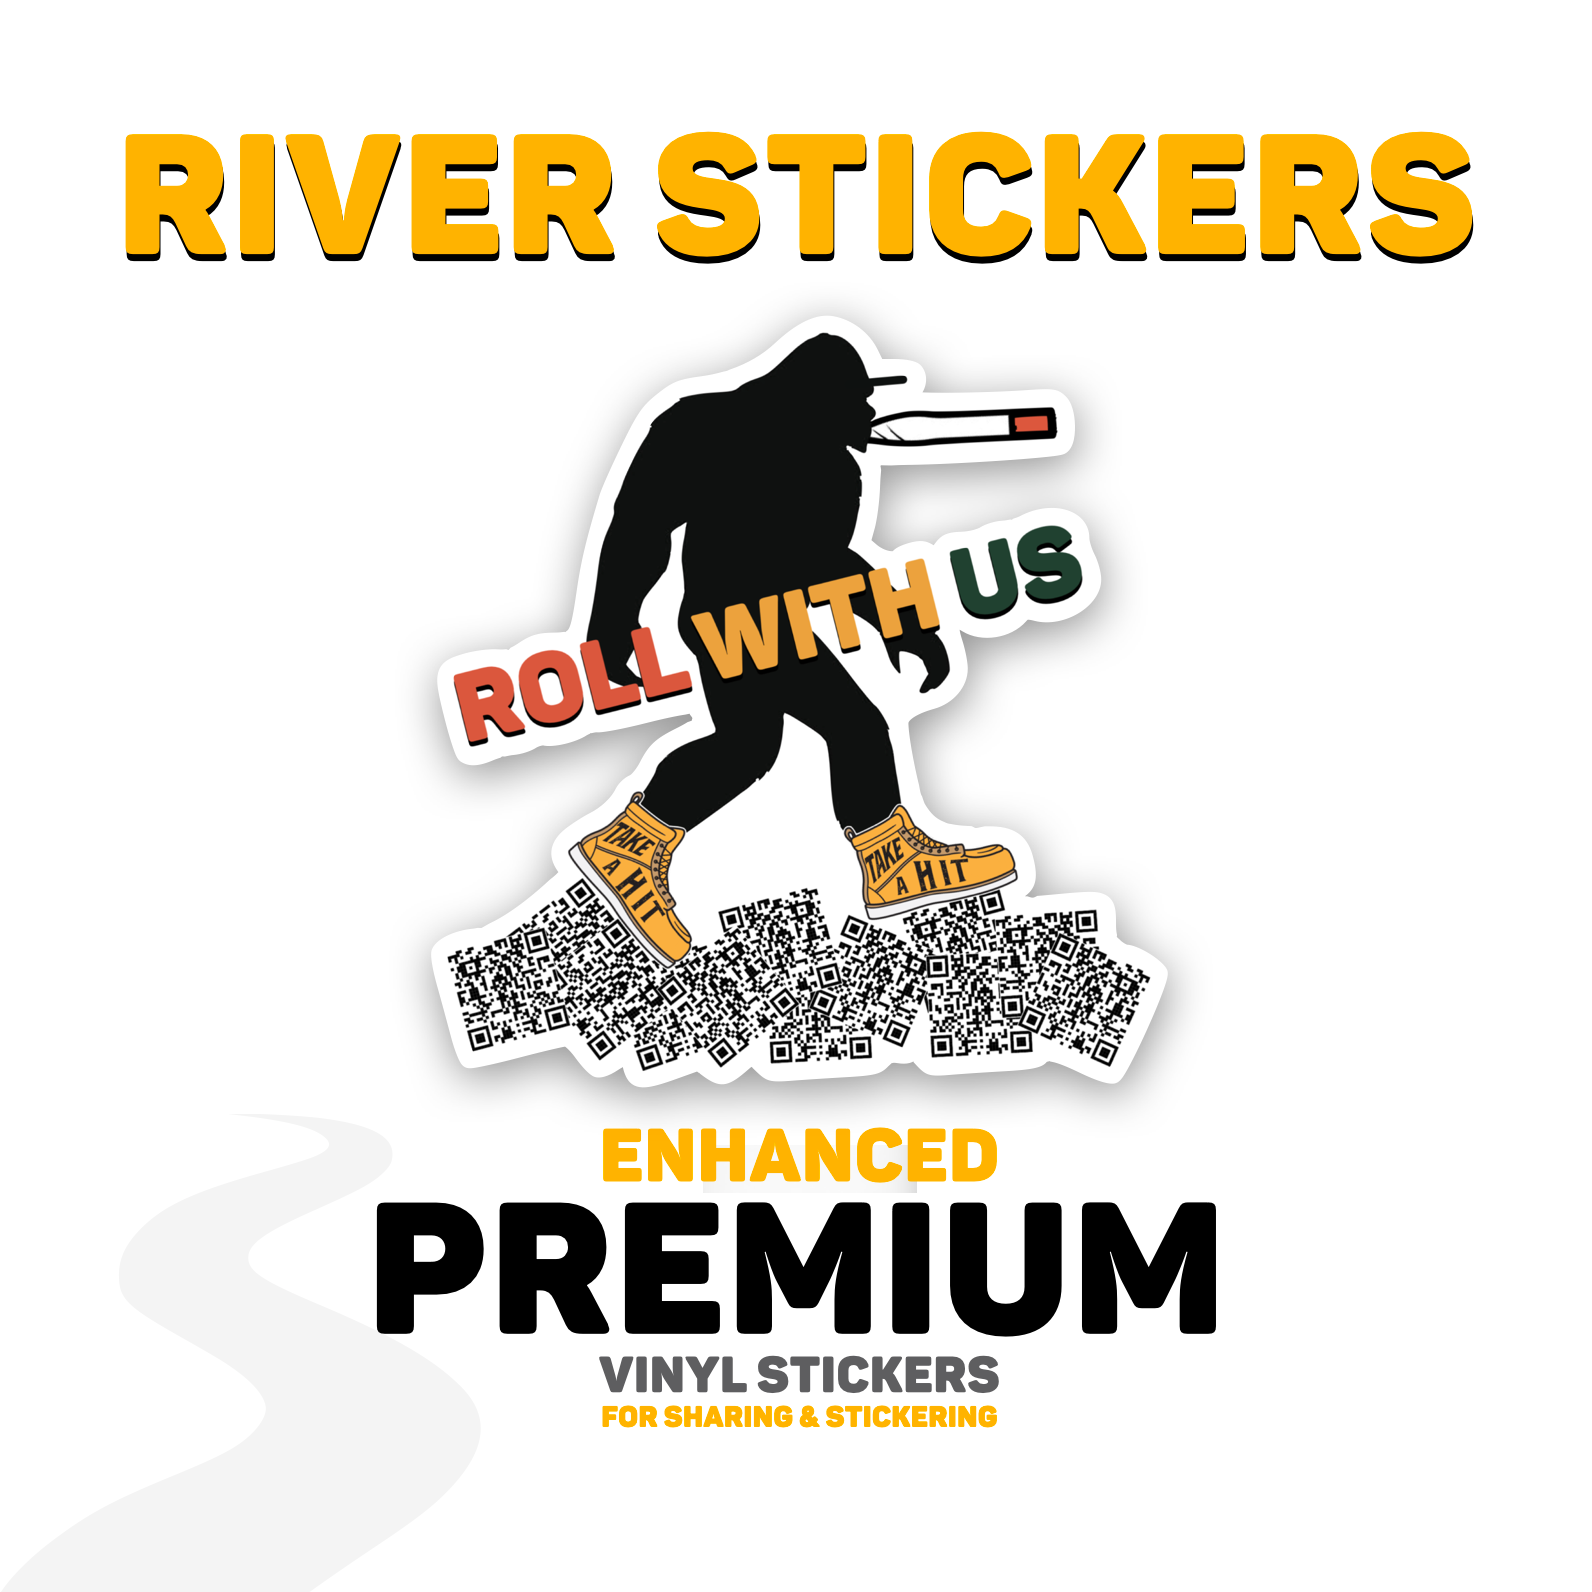 RIVER STICKERS - ROLL WITH US COLLECTION